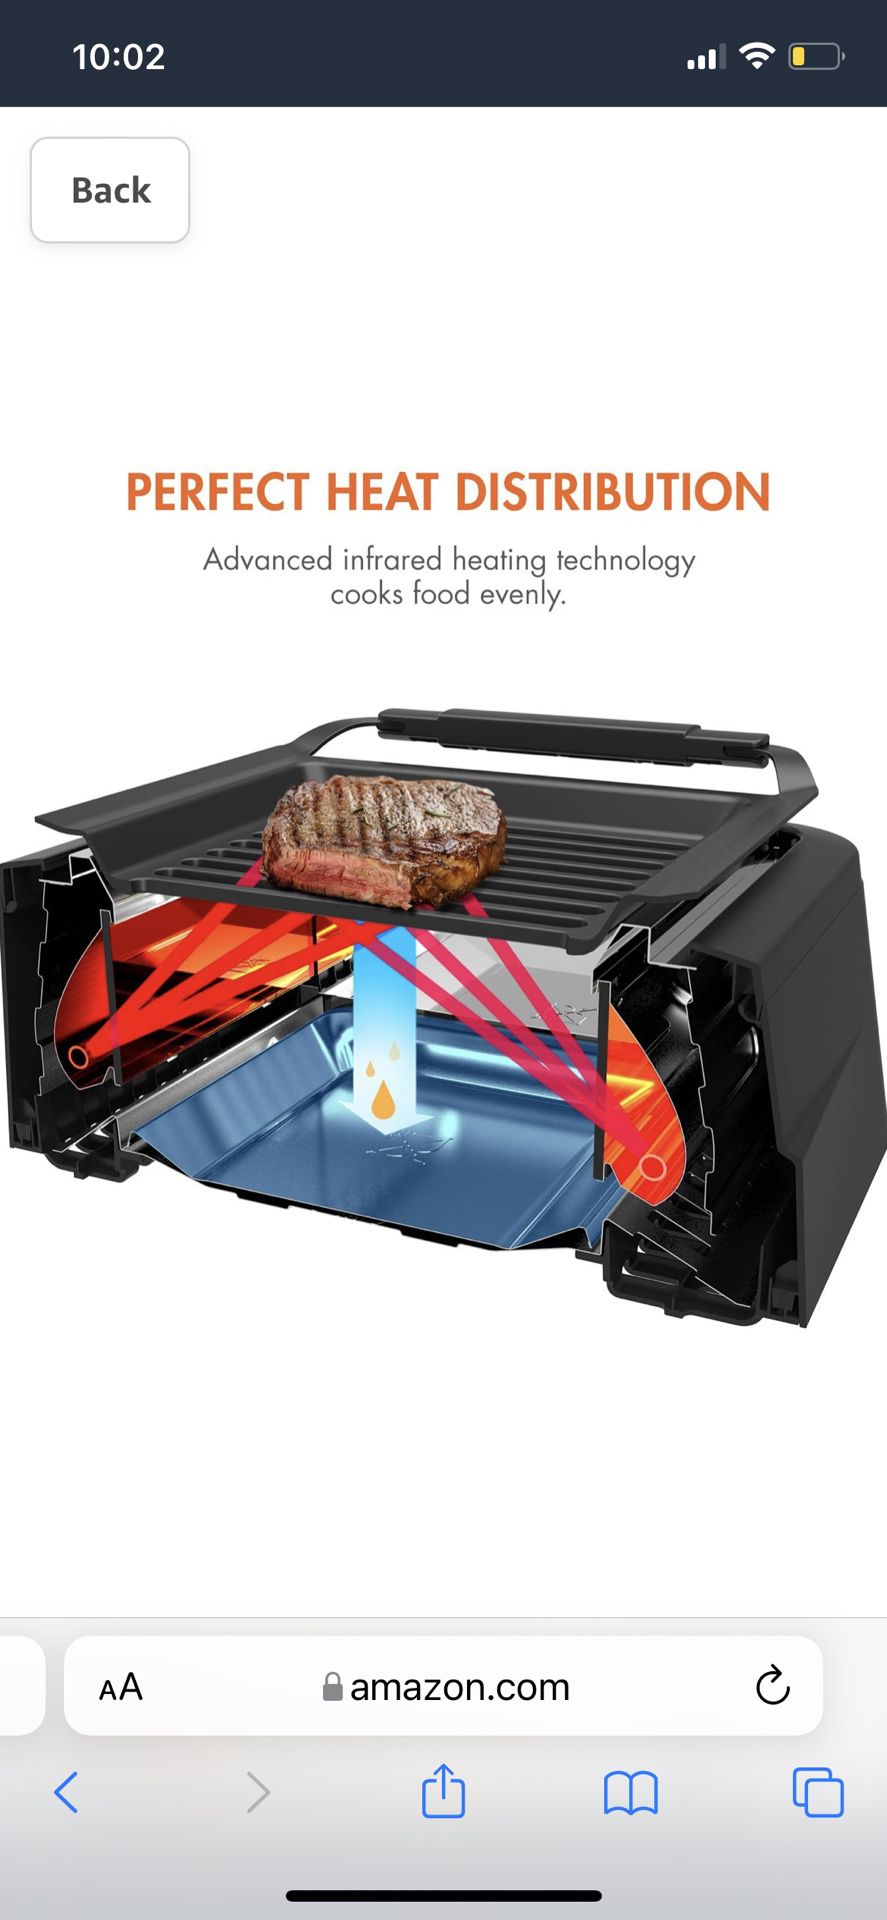 Redigrill Smoke-Less Infrared Indoor Grill